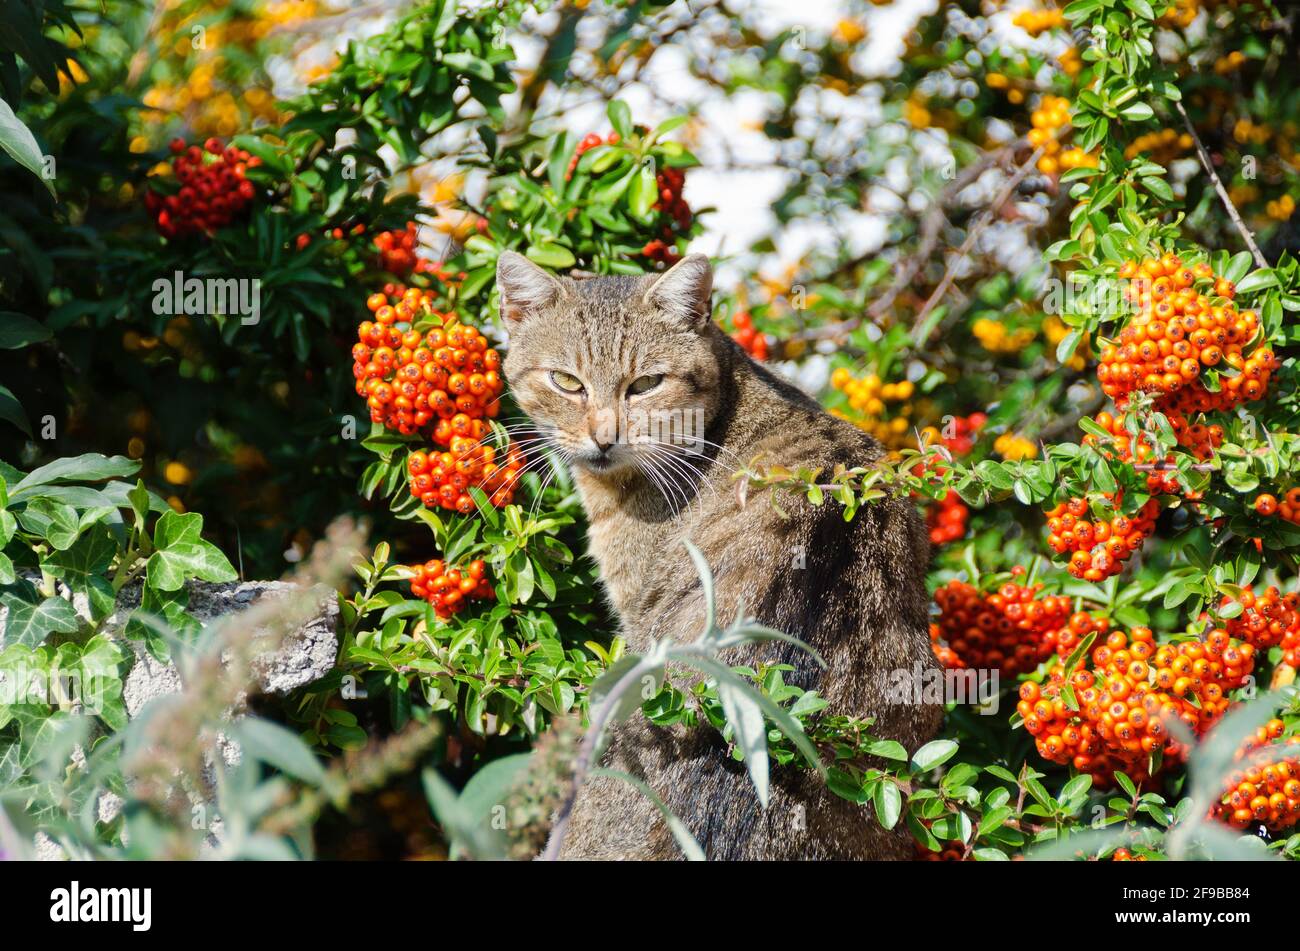 cat in a seabuckthorn bush with orange fruits at sunshine Stock Photo